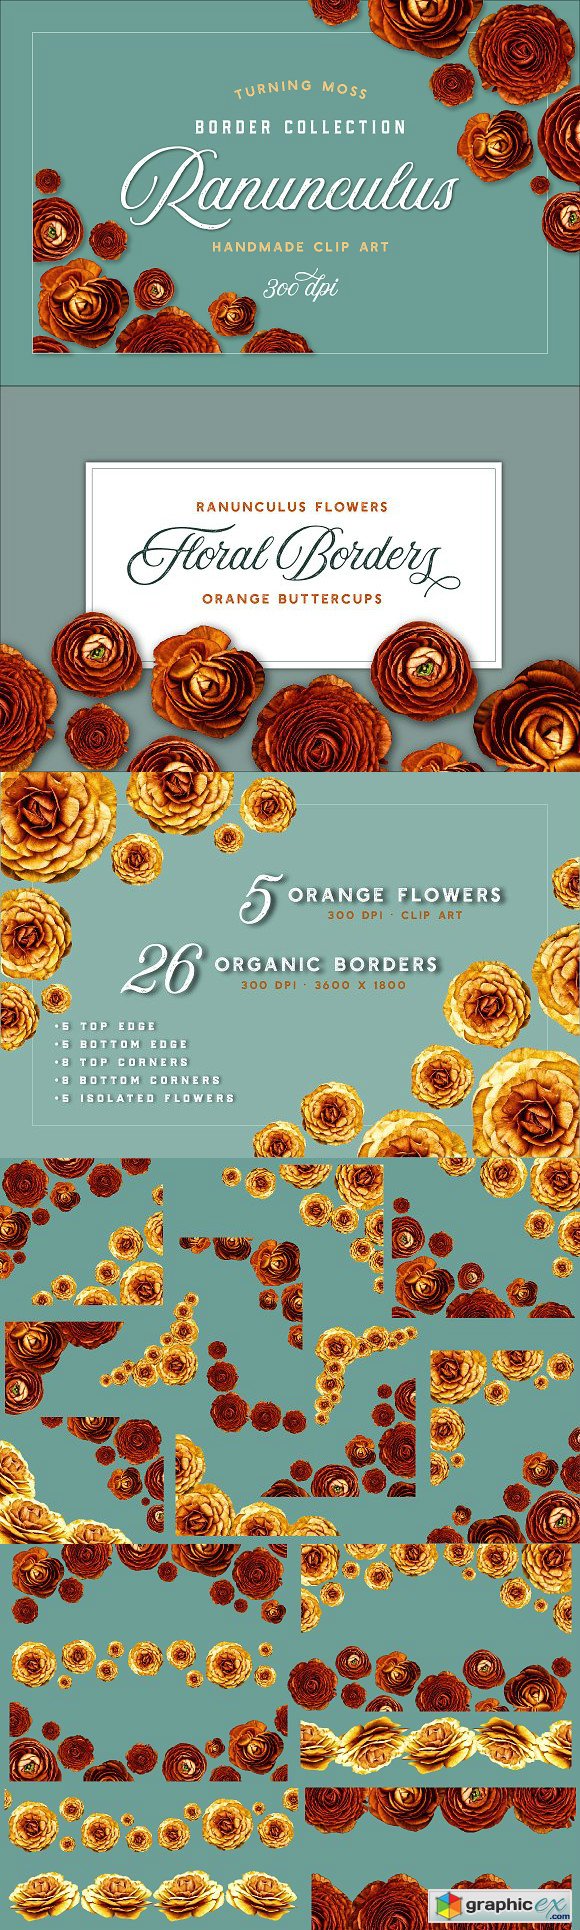 Ranunculus Borders and ClipArt